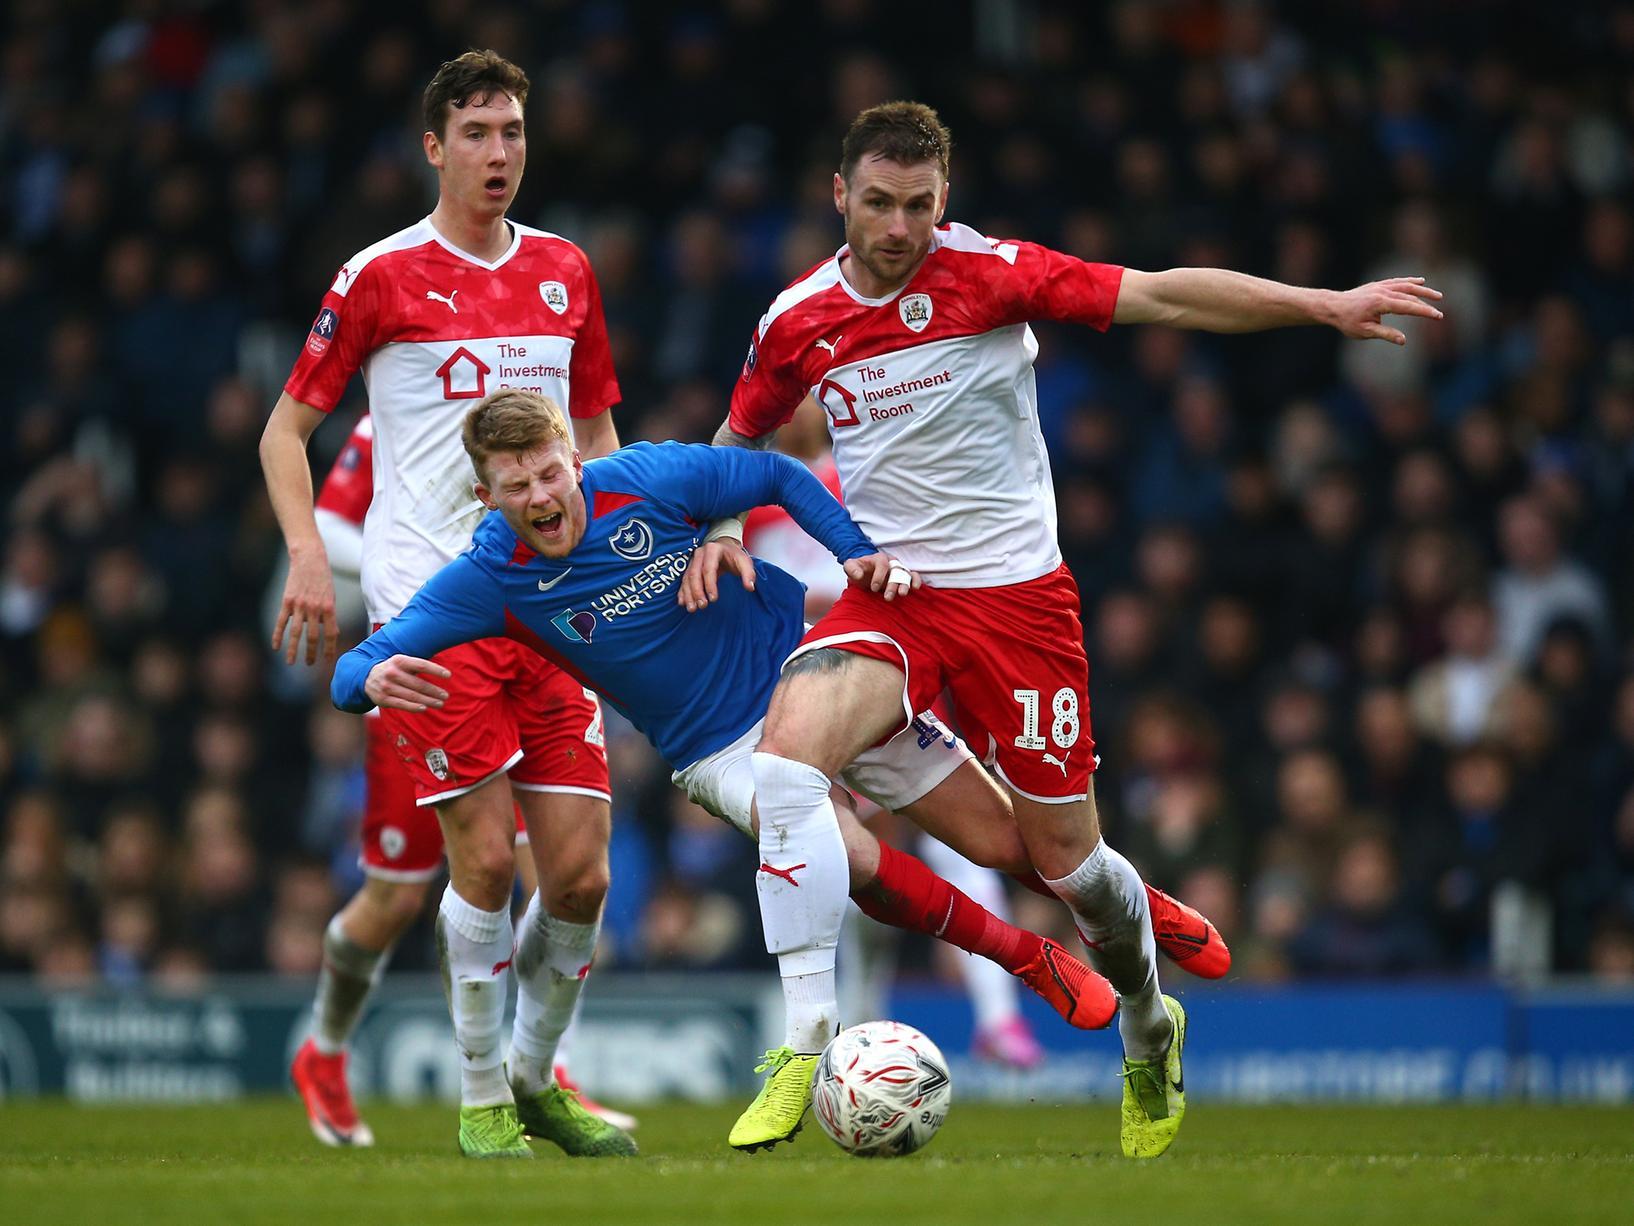 Barnsley's new signing Michael Sollbauer has claimed his side have much tough work ahead of them to avoid relegation, but suggested his footballing experience could be a real boost to his team's chances. (Sport Witness)